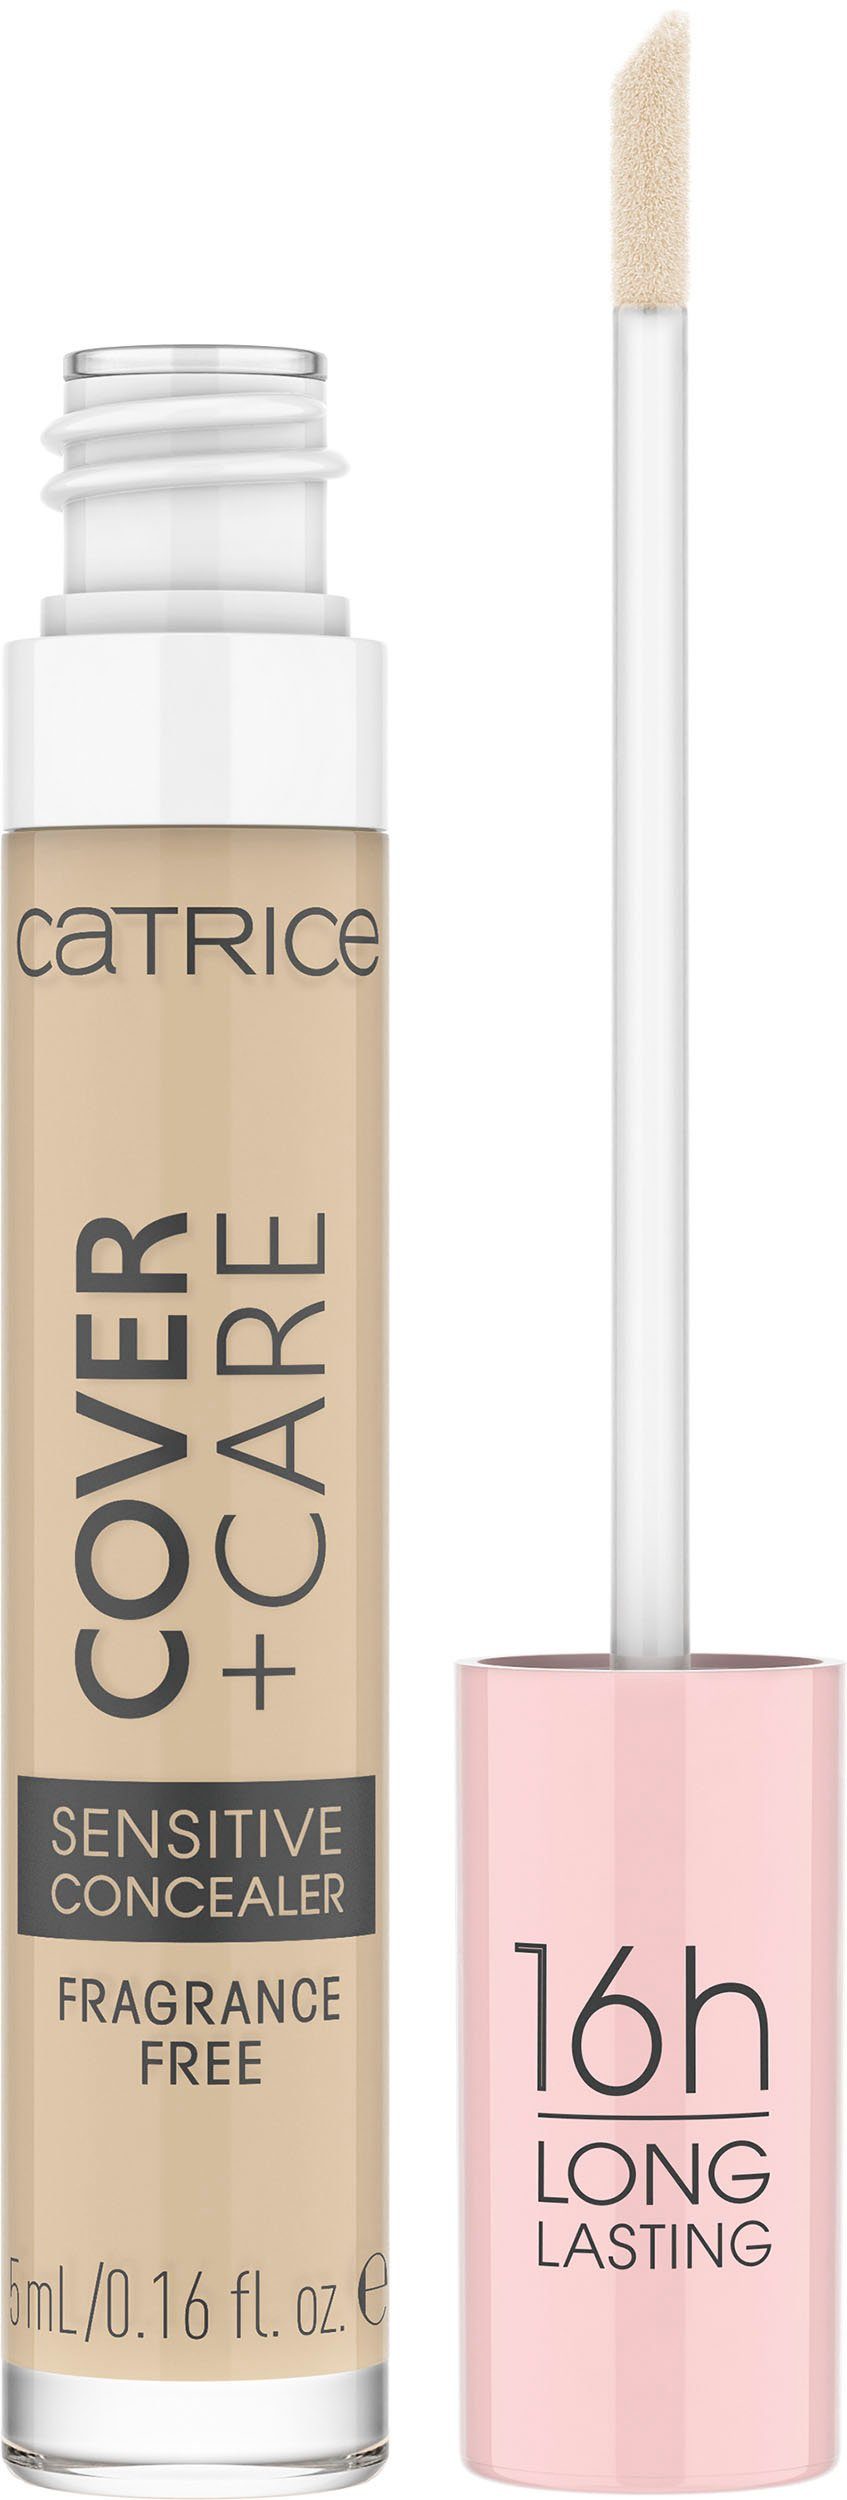 Concealer, Care Sensitive nude 002N Cover Concealer Catrice Catrice + 3-tlg.